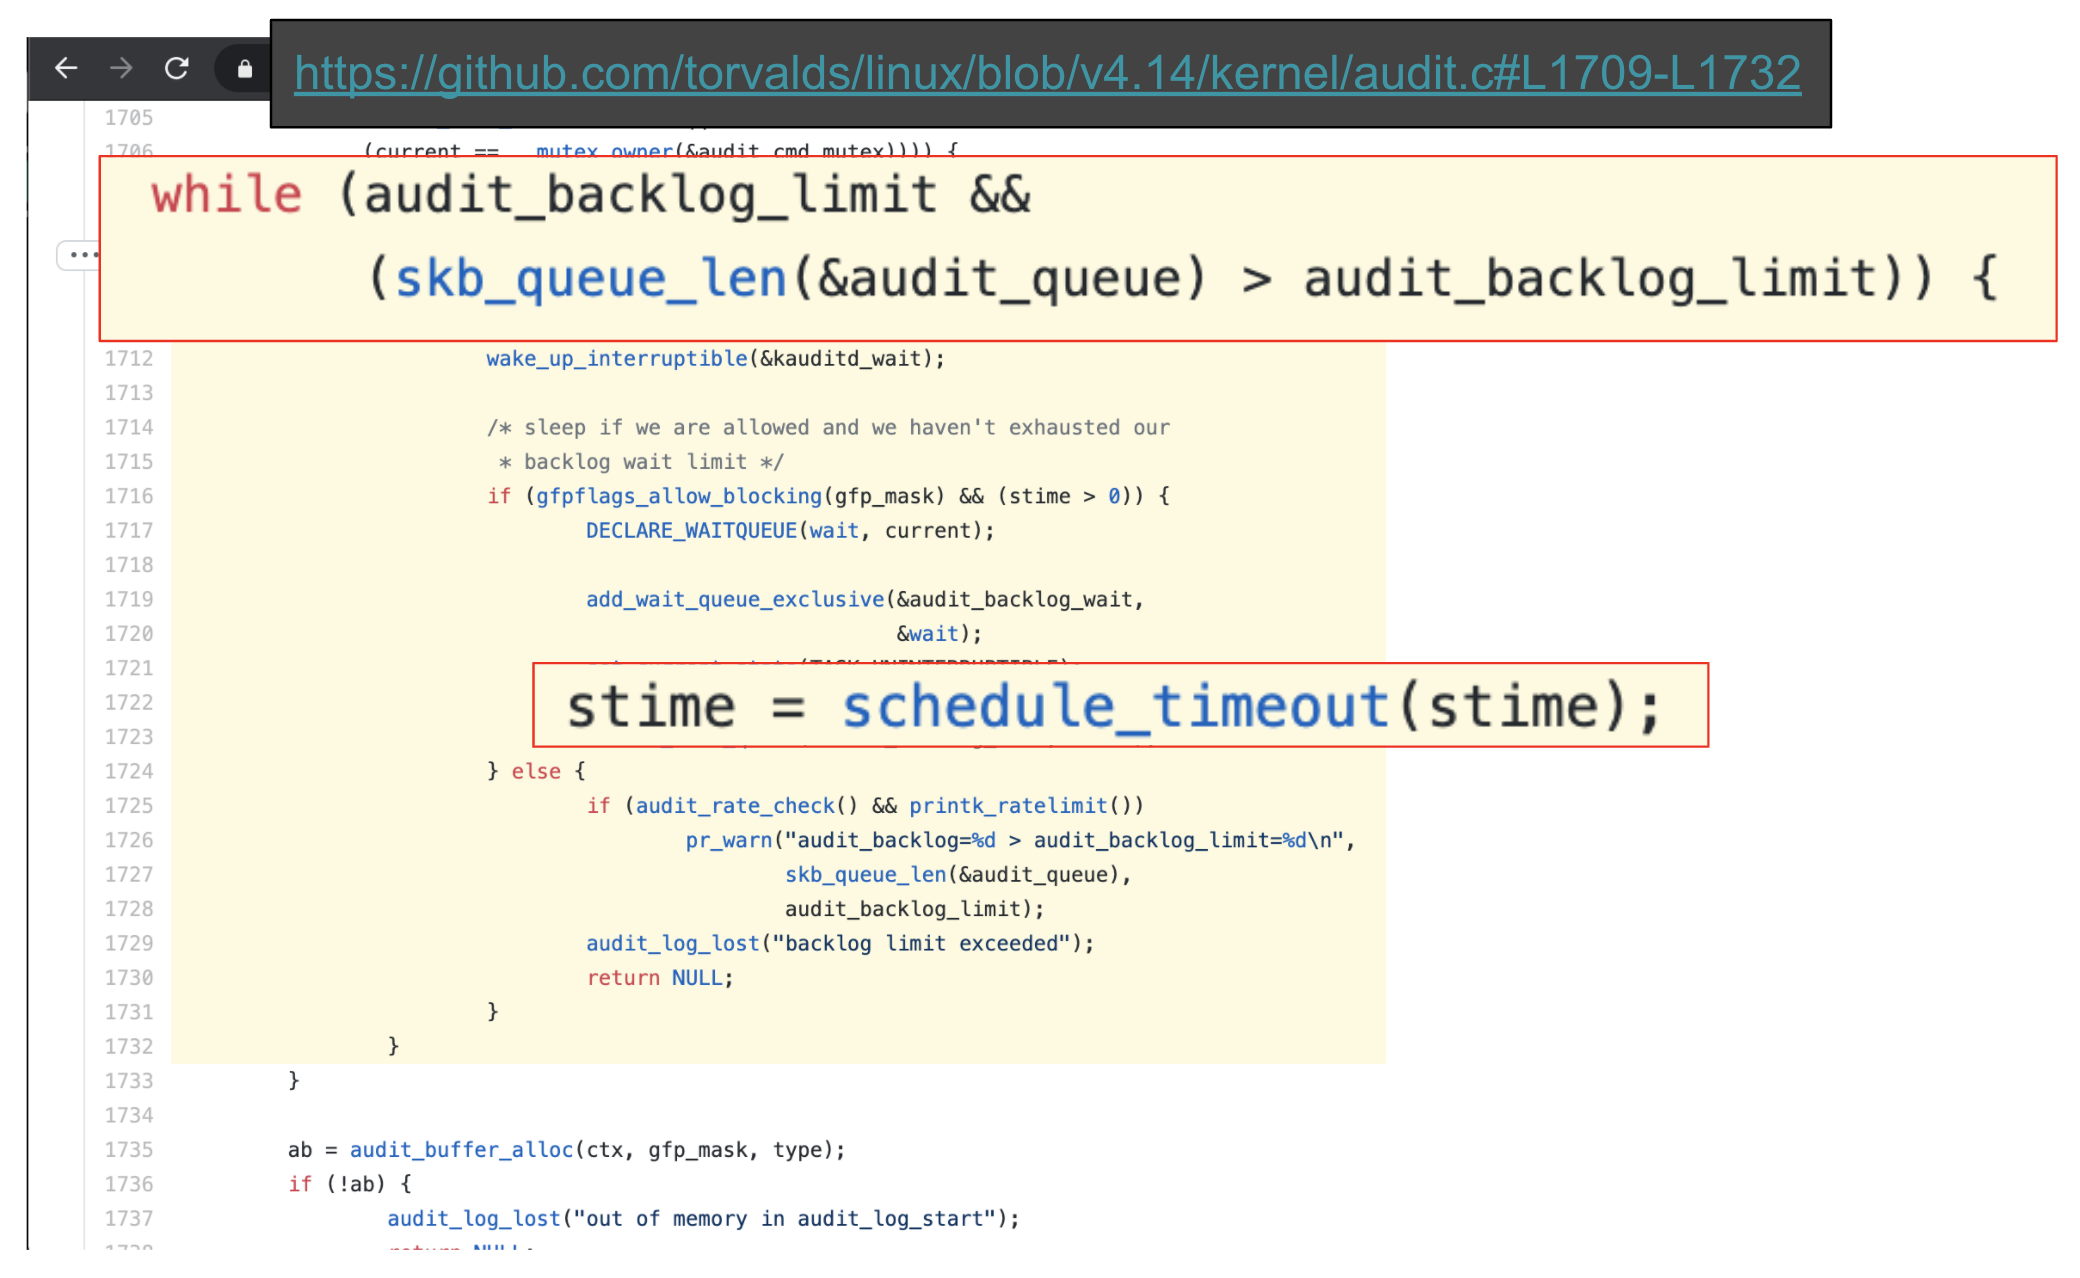 Snippet of kernel/audit.c showing call to schedule_timeout